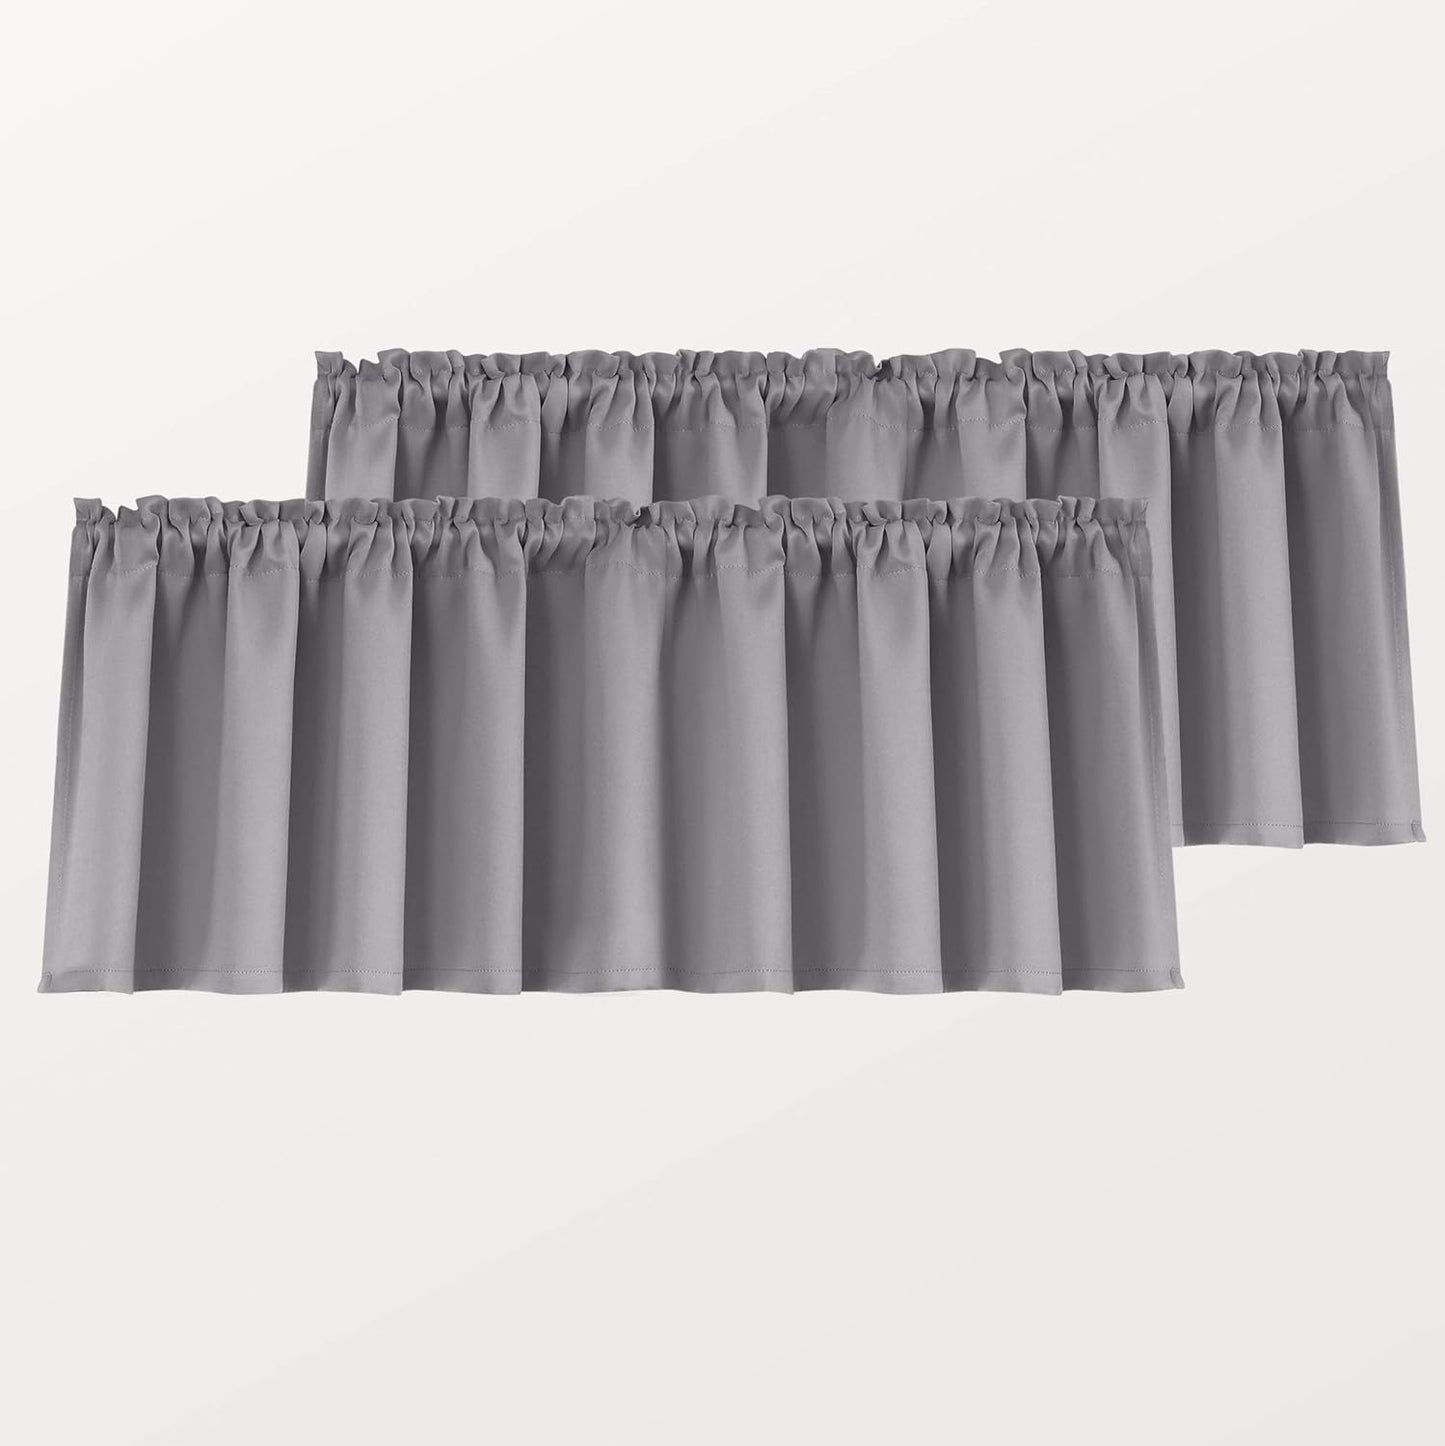 Mrs.Naturall Beige Valance Curtains for Windows 36X16 Inch Length  MRS.NATURALL TEXTILE Grey 52X18 